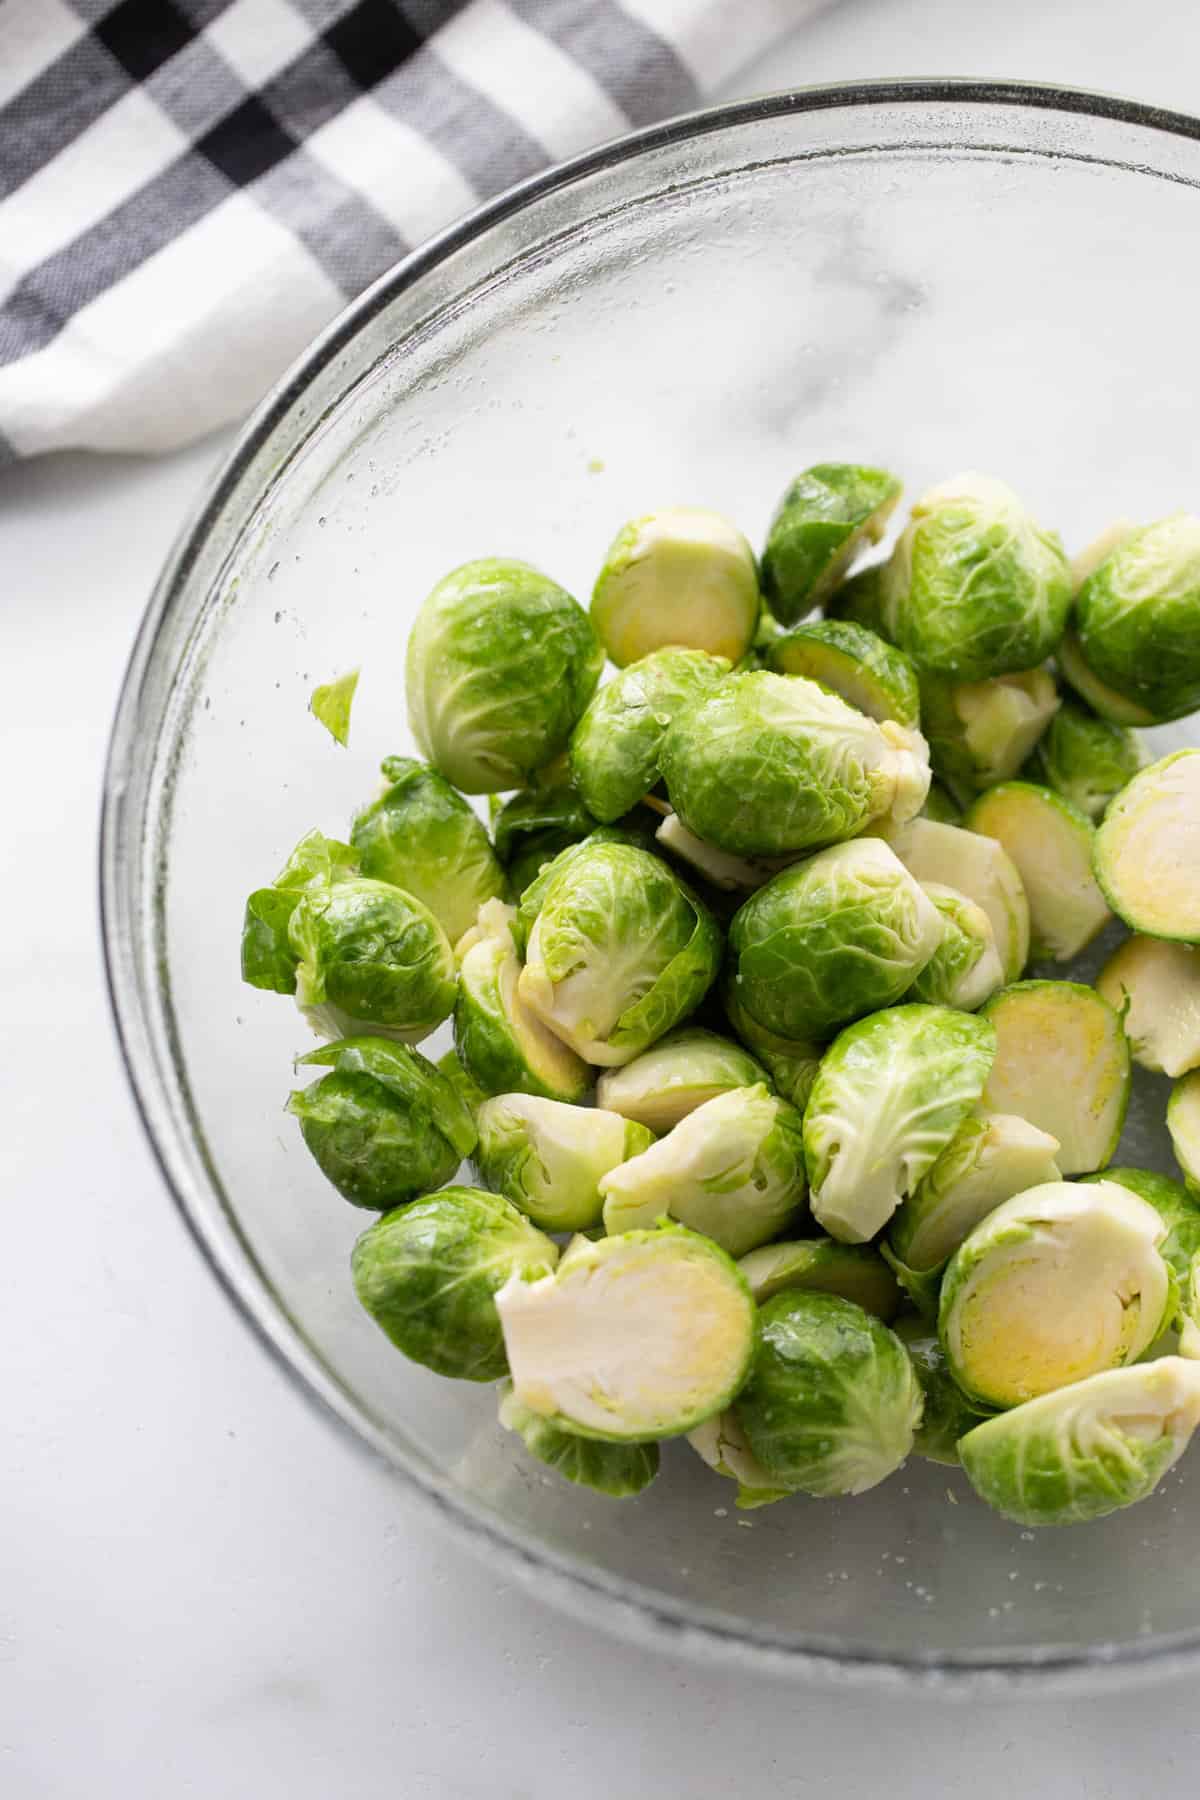 A bowl of Brussels sprouts coated in oil and kosher salt.